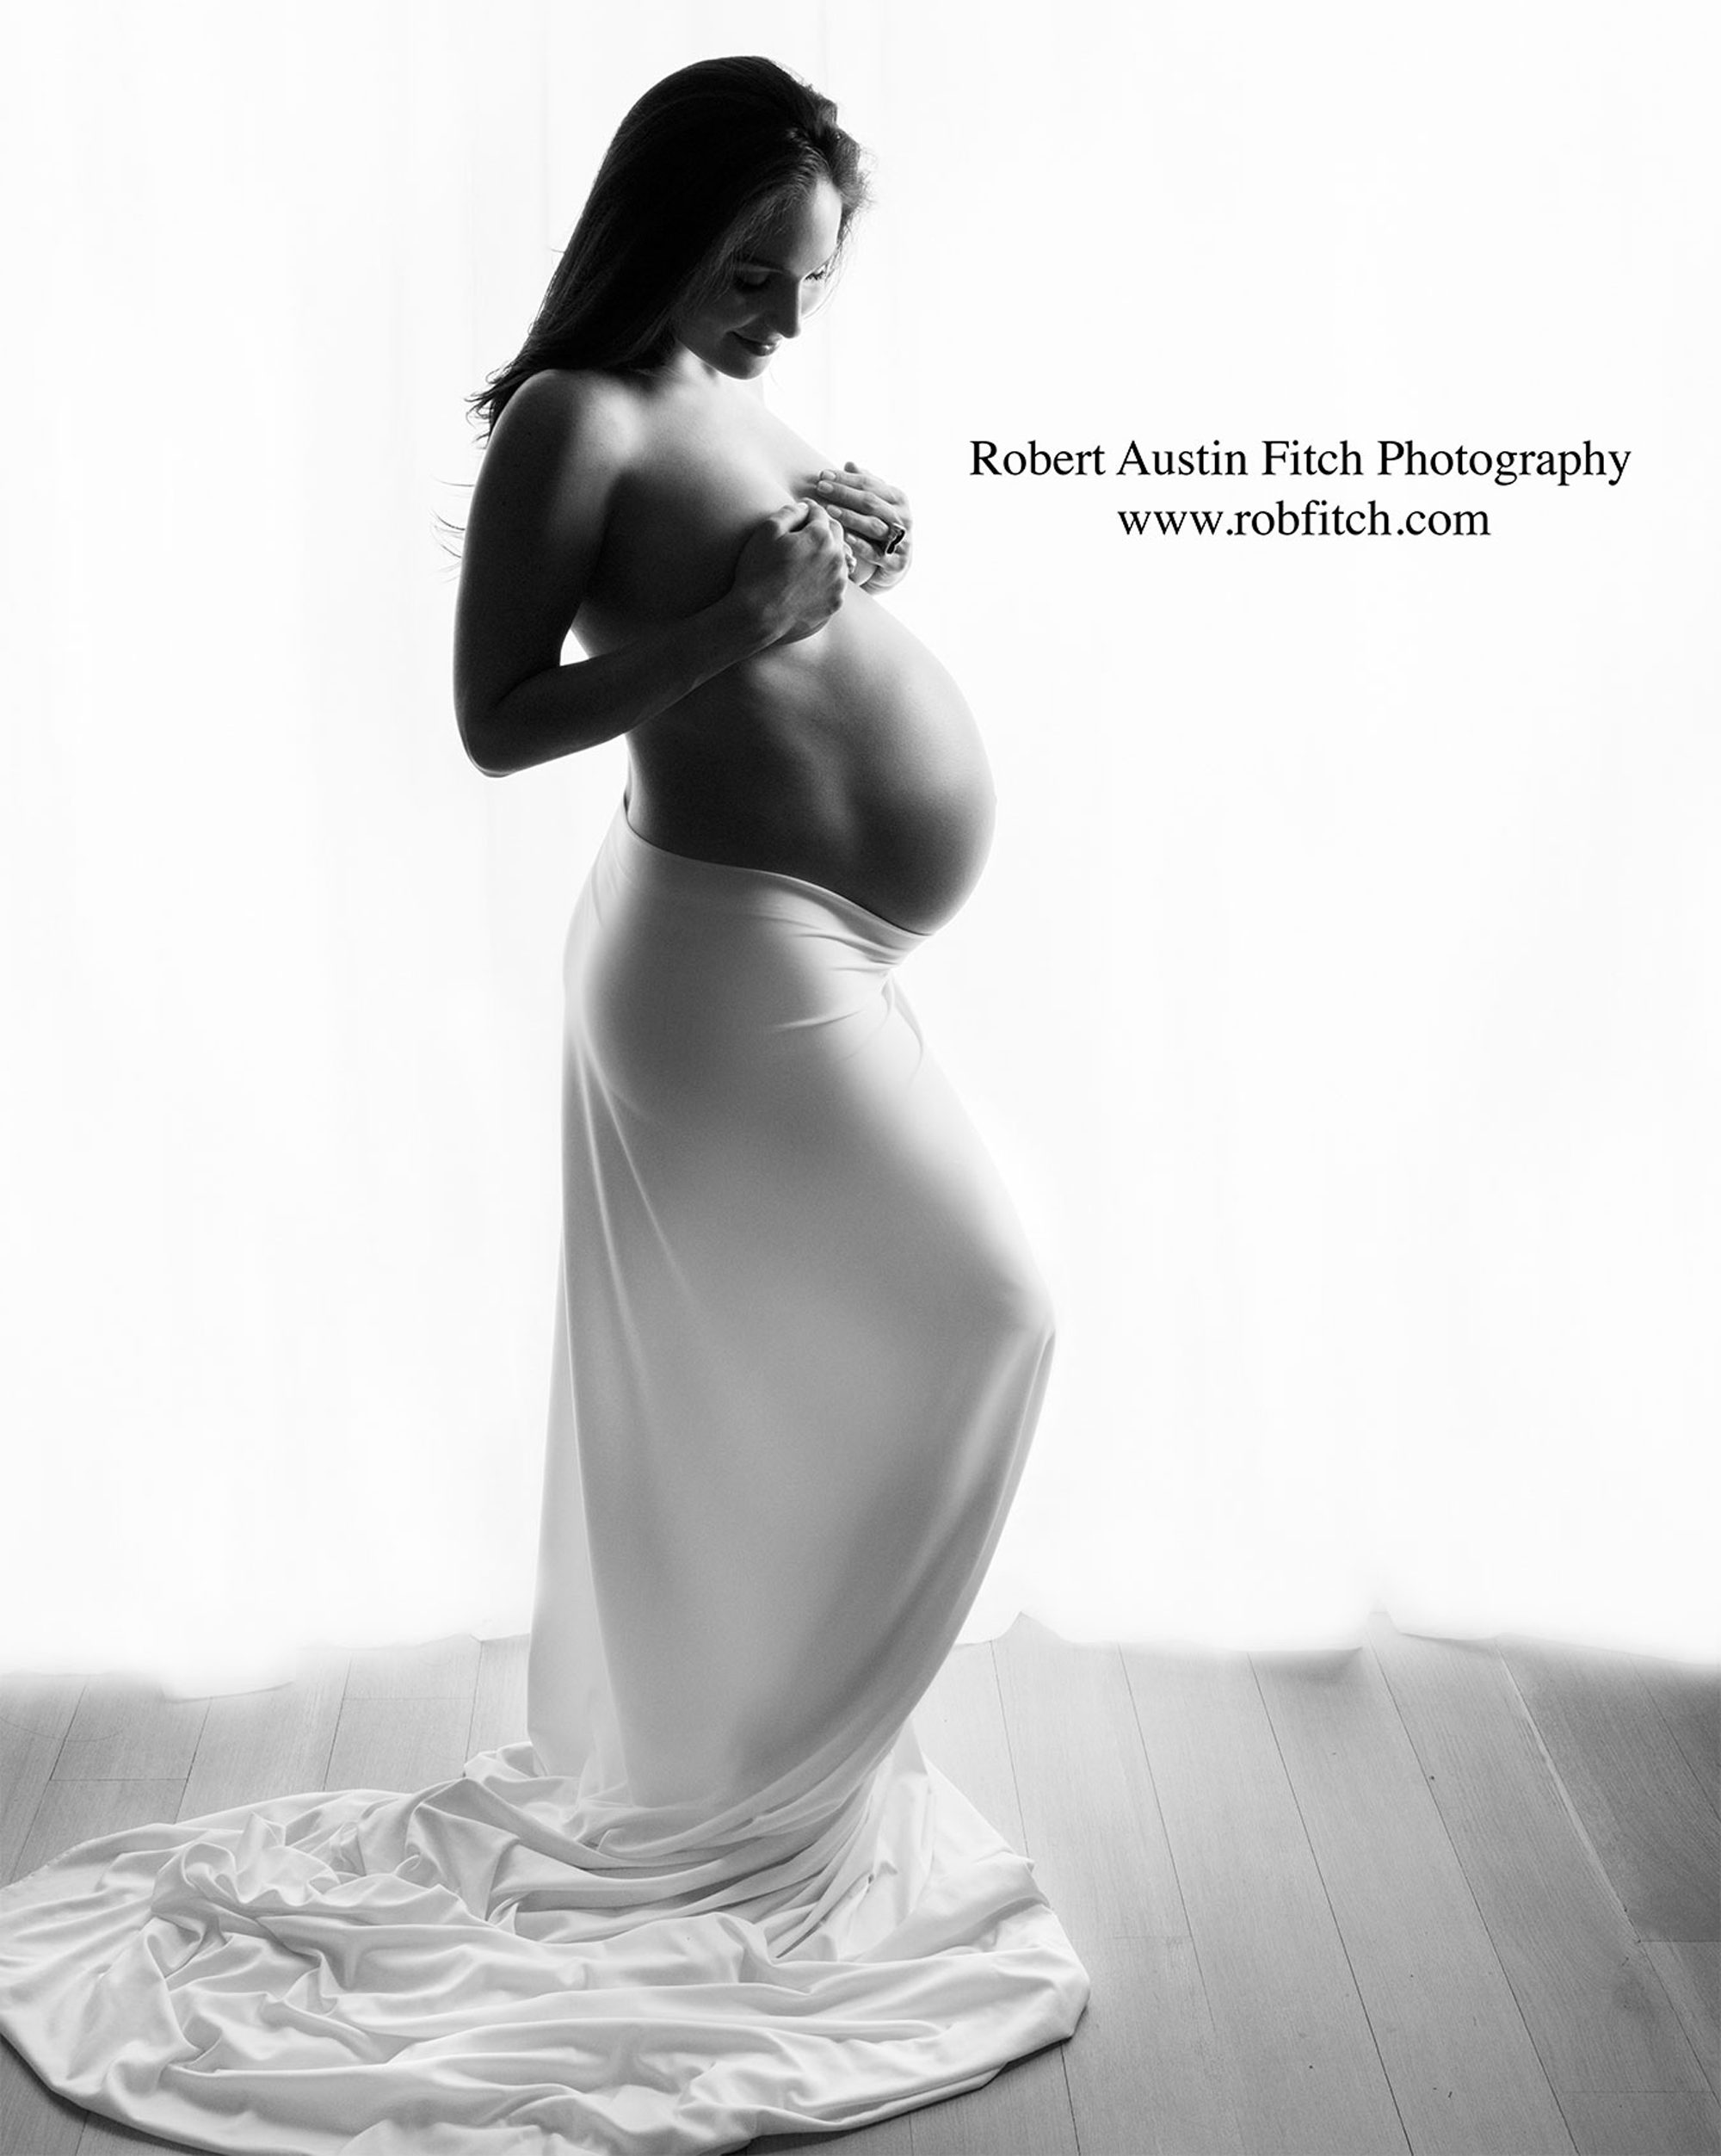 B&W Silhouette Maternity Photo of Pregnant Woman with White Fabric Draping